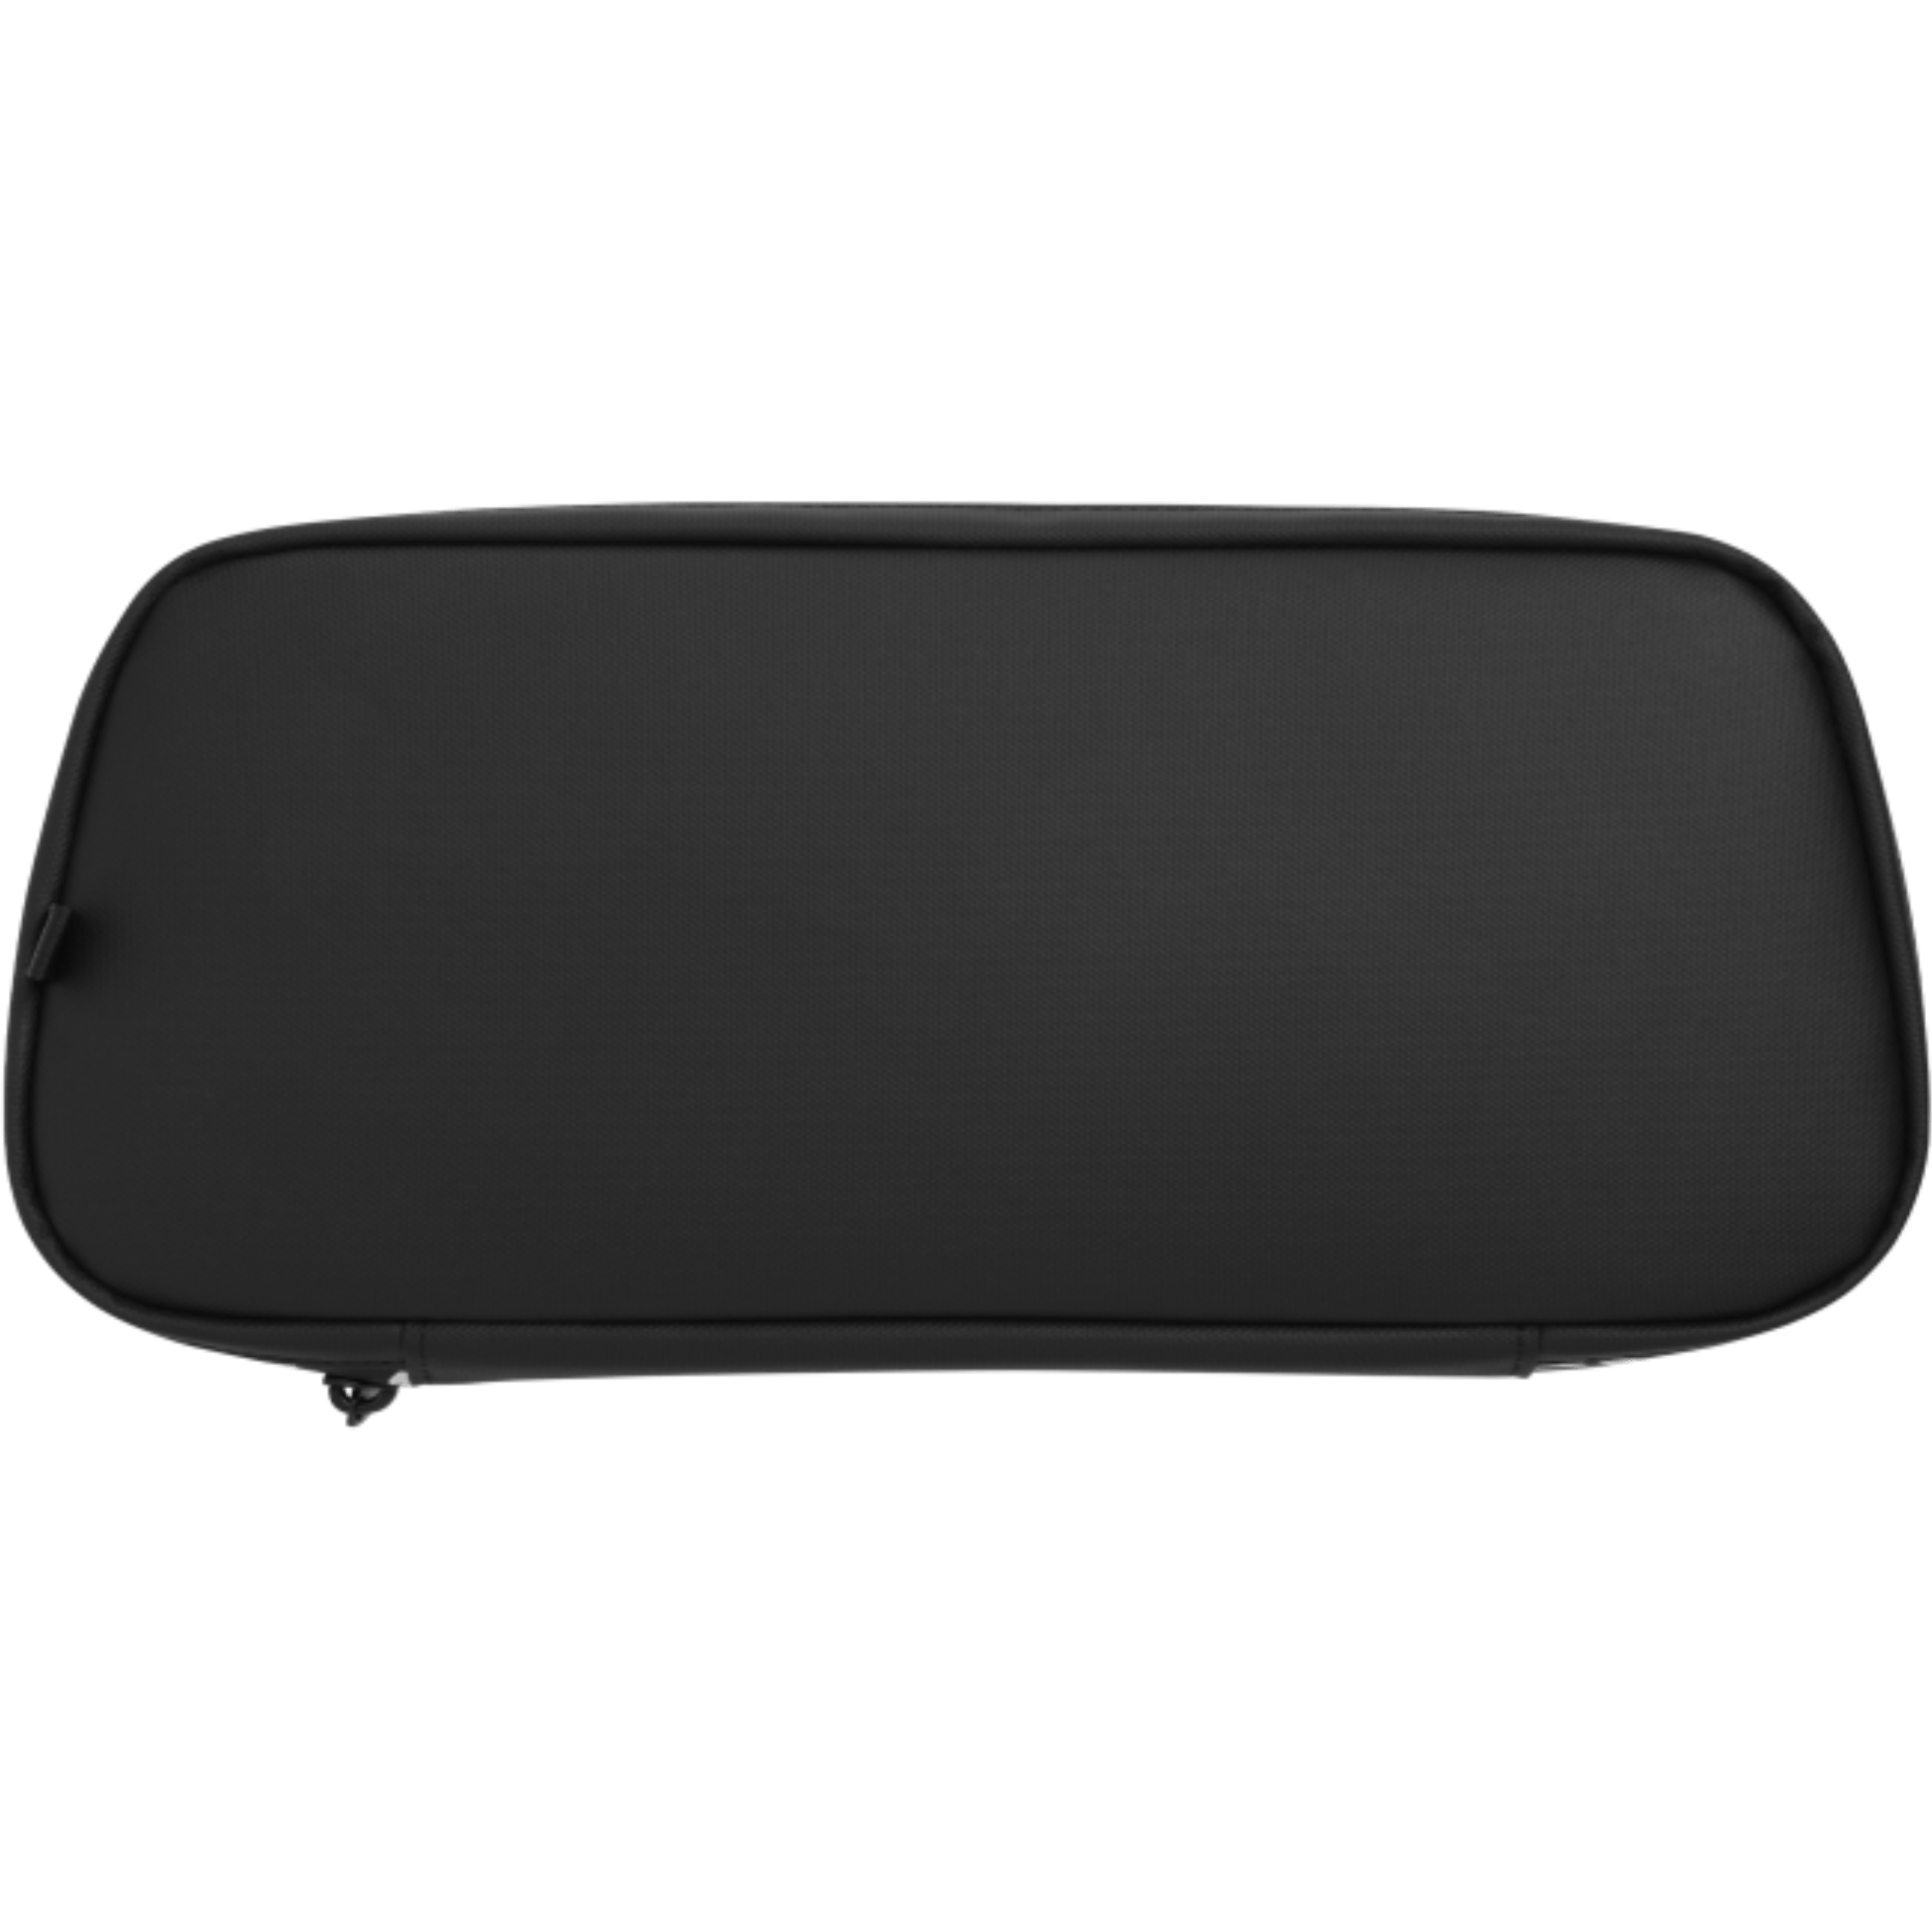 ASUS ROG ALLY TRAVEL CASE